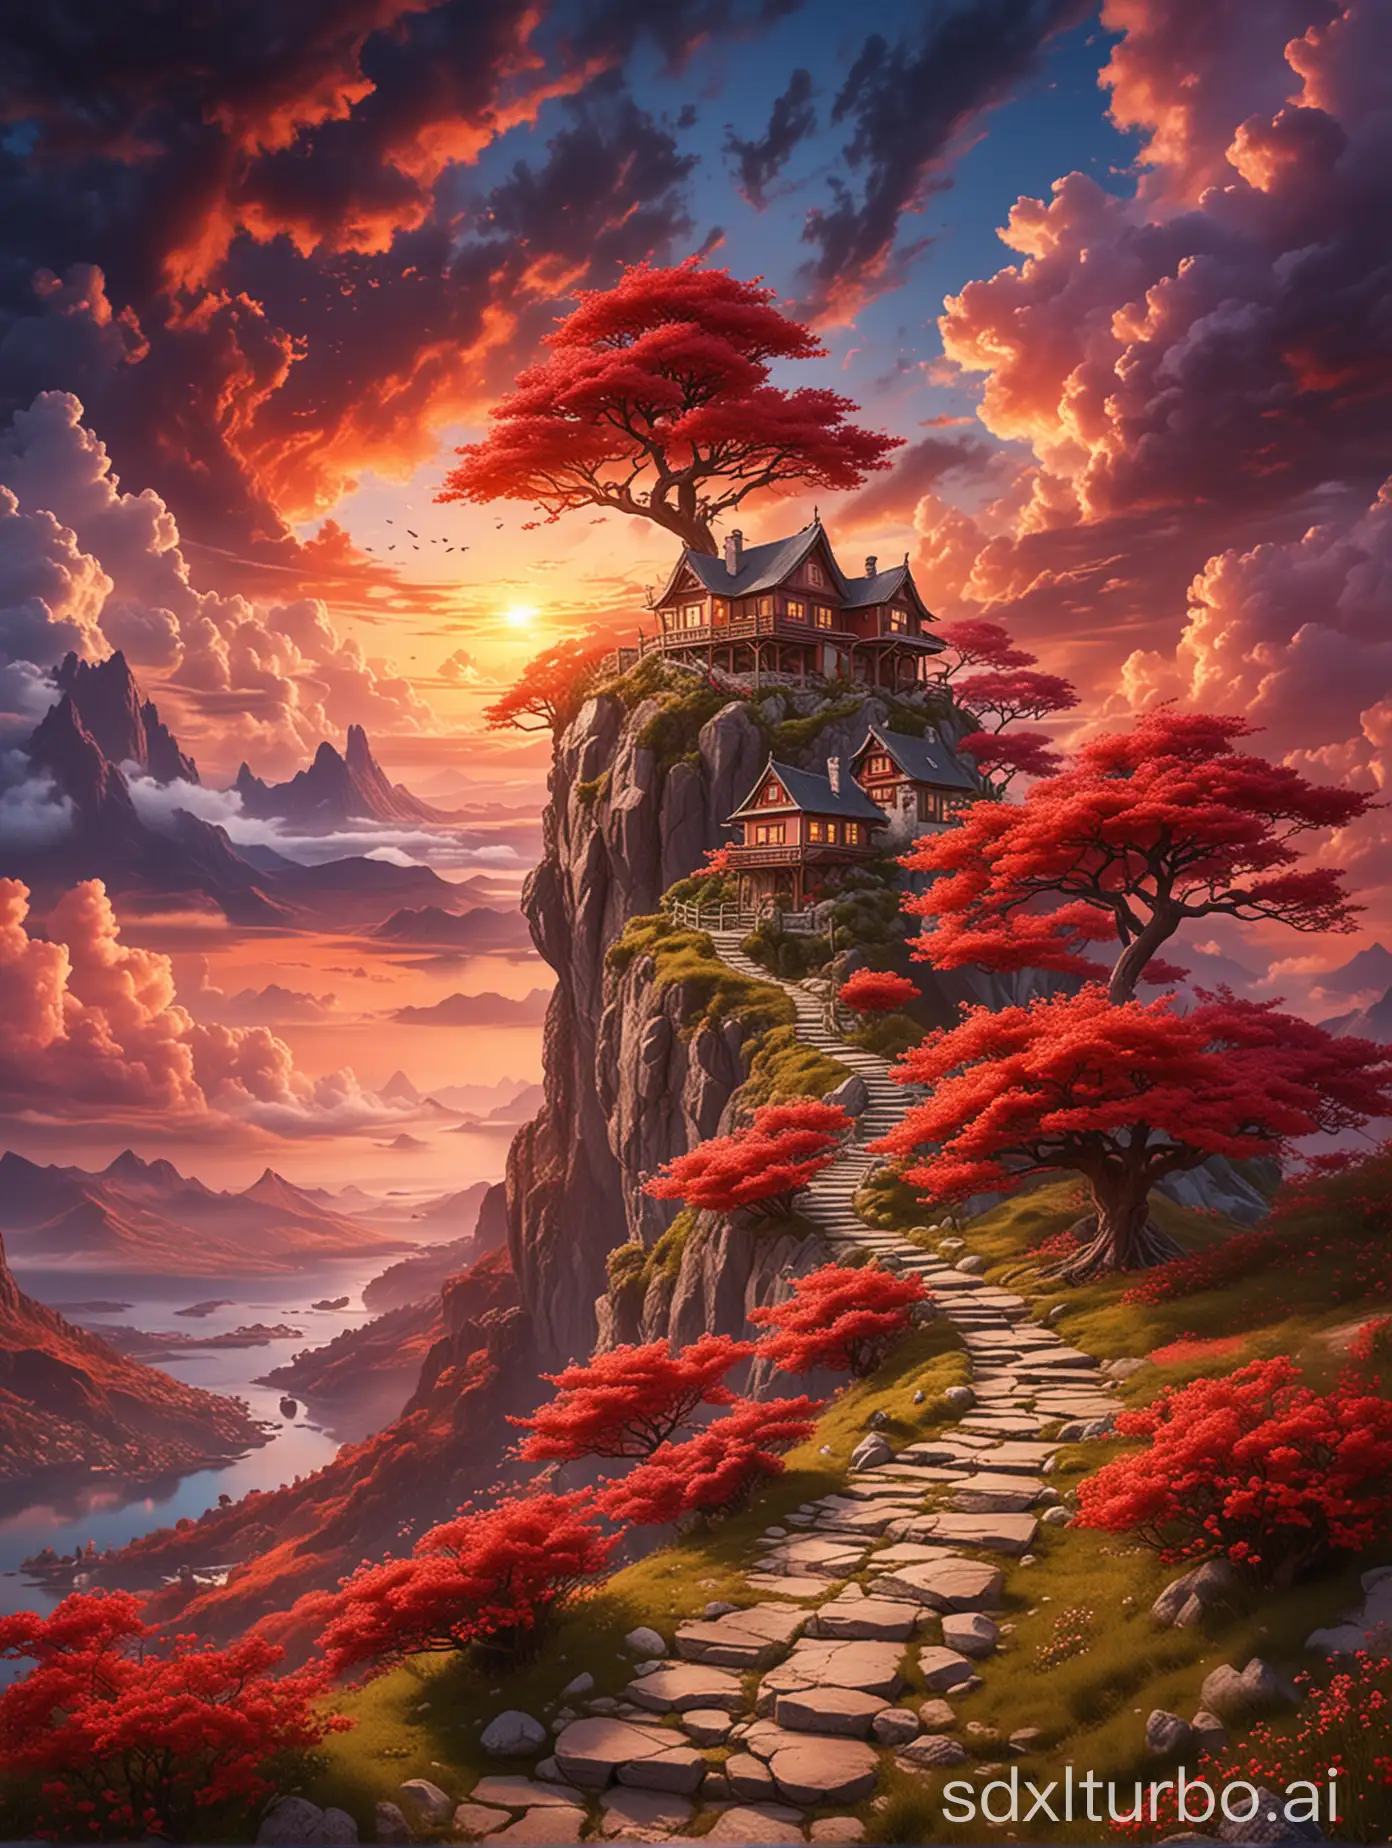 Vibrant-Fantasy-Landscape-with-Mountain-Path-Floating-Island-and-RedBlossomed-Tree